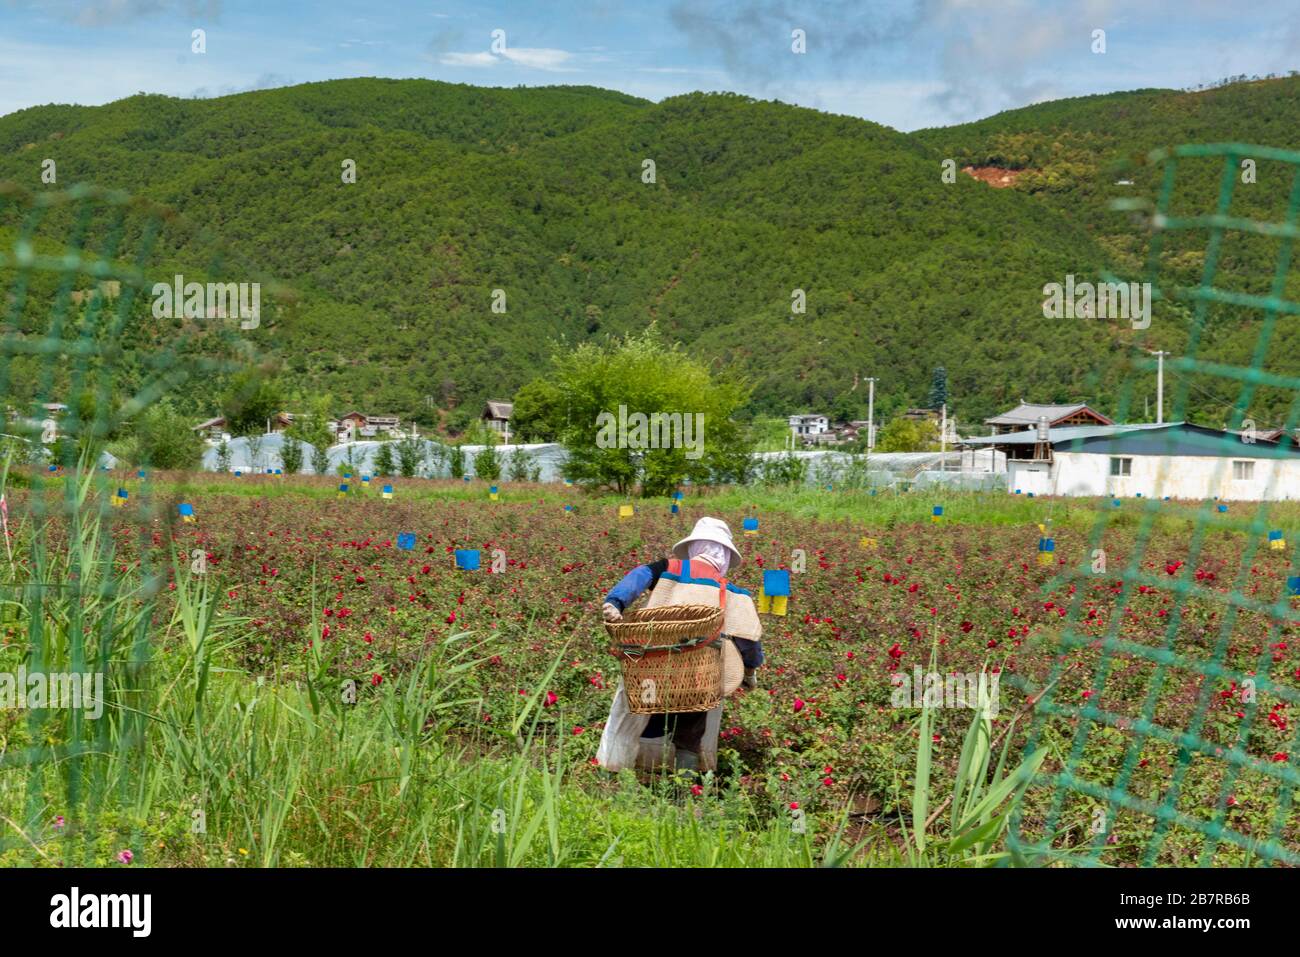 One of the Naxi  farmers harvesting roses to be used in cosmetics and baked goods at Lashi Lake, in Yunnan, China Stock Photo